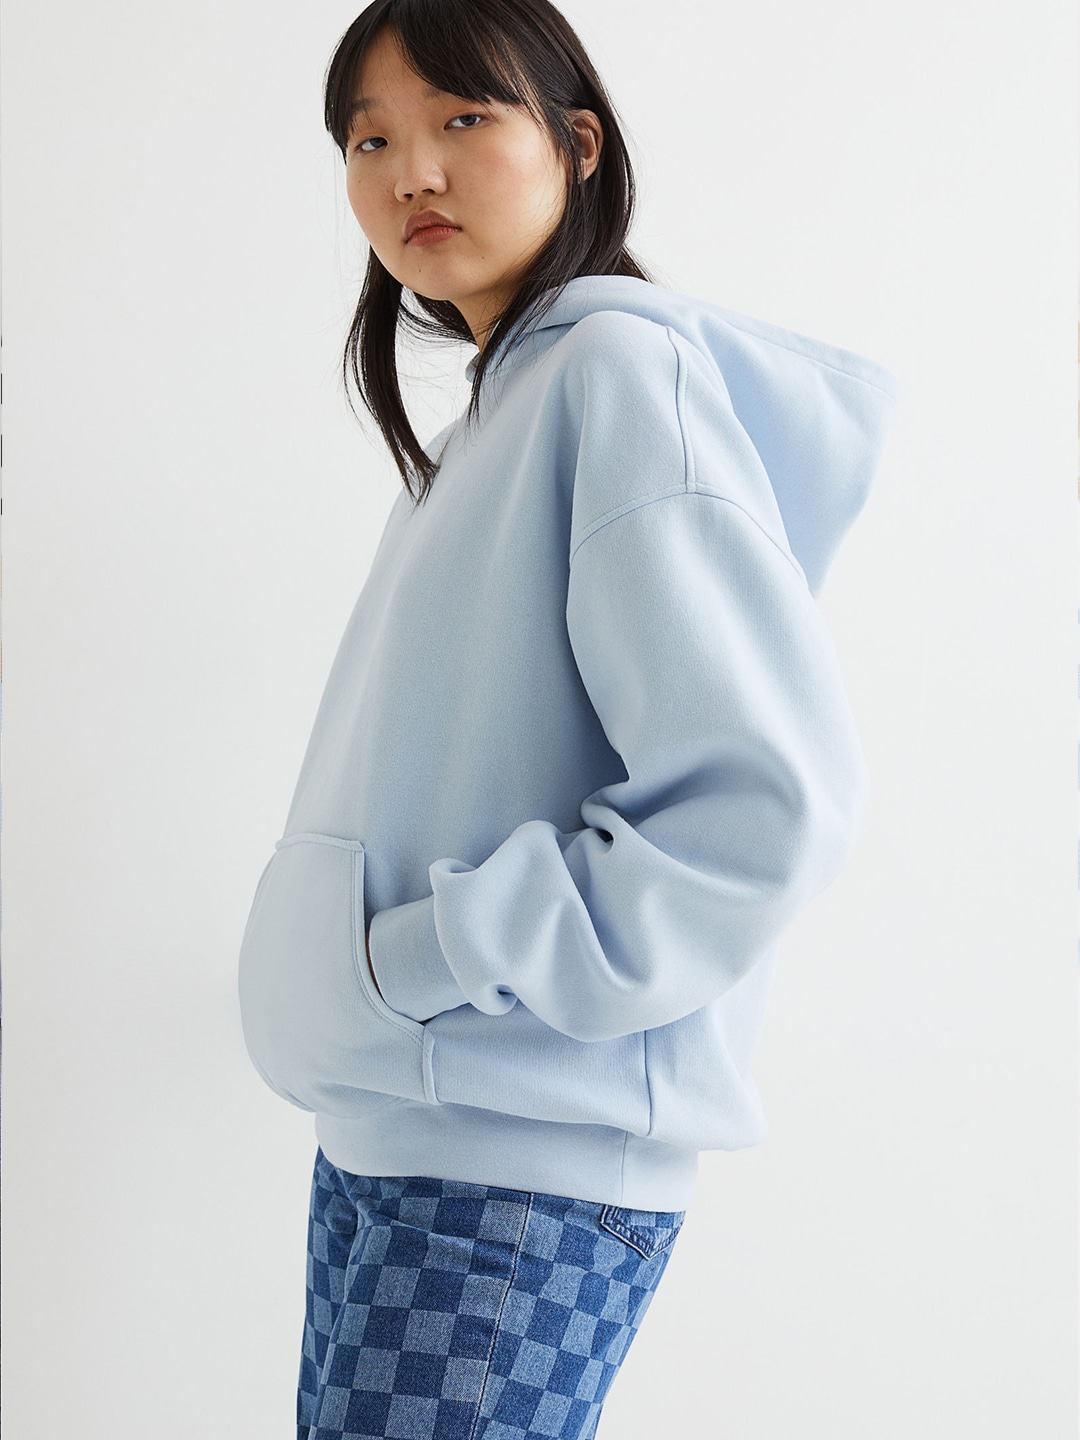 H&M Woman Blue Hoodie Price in India